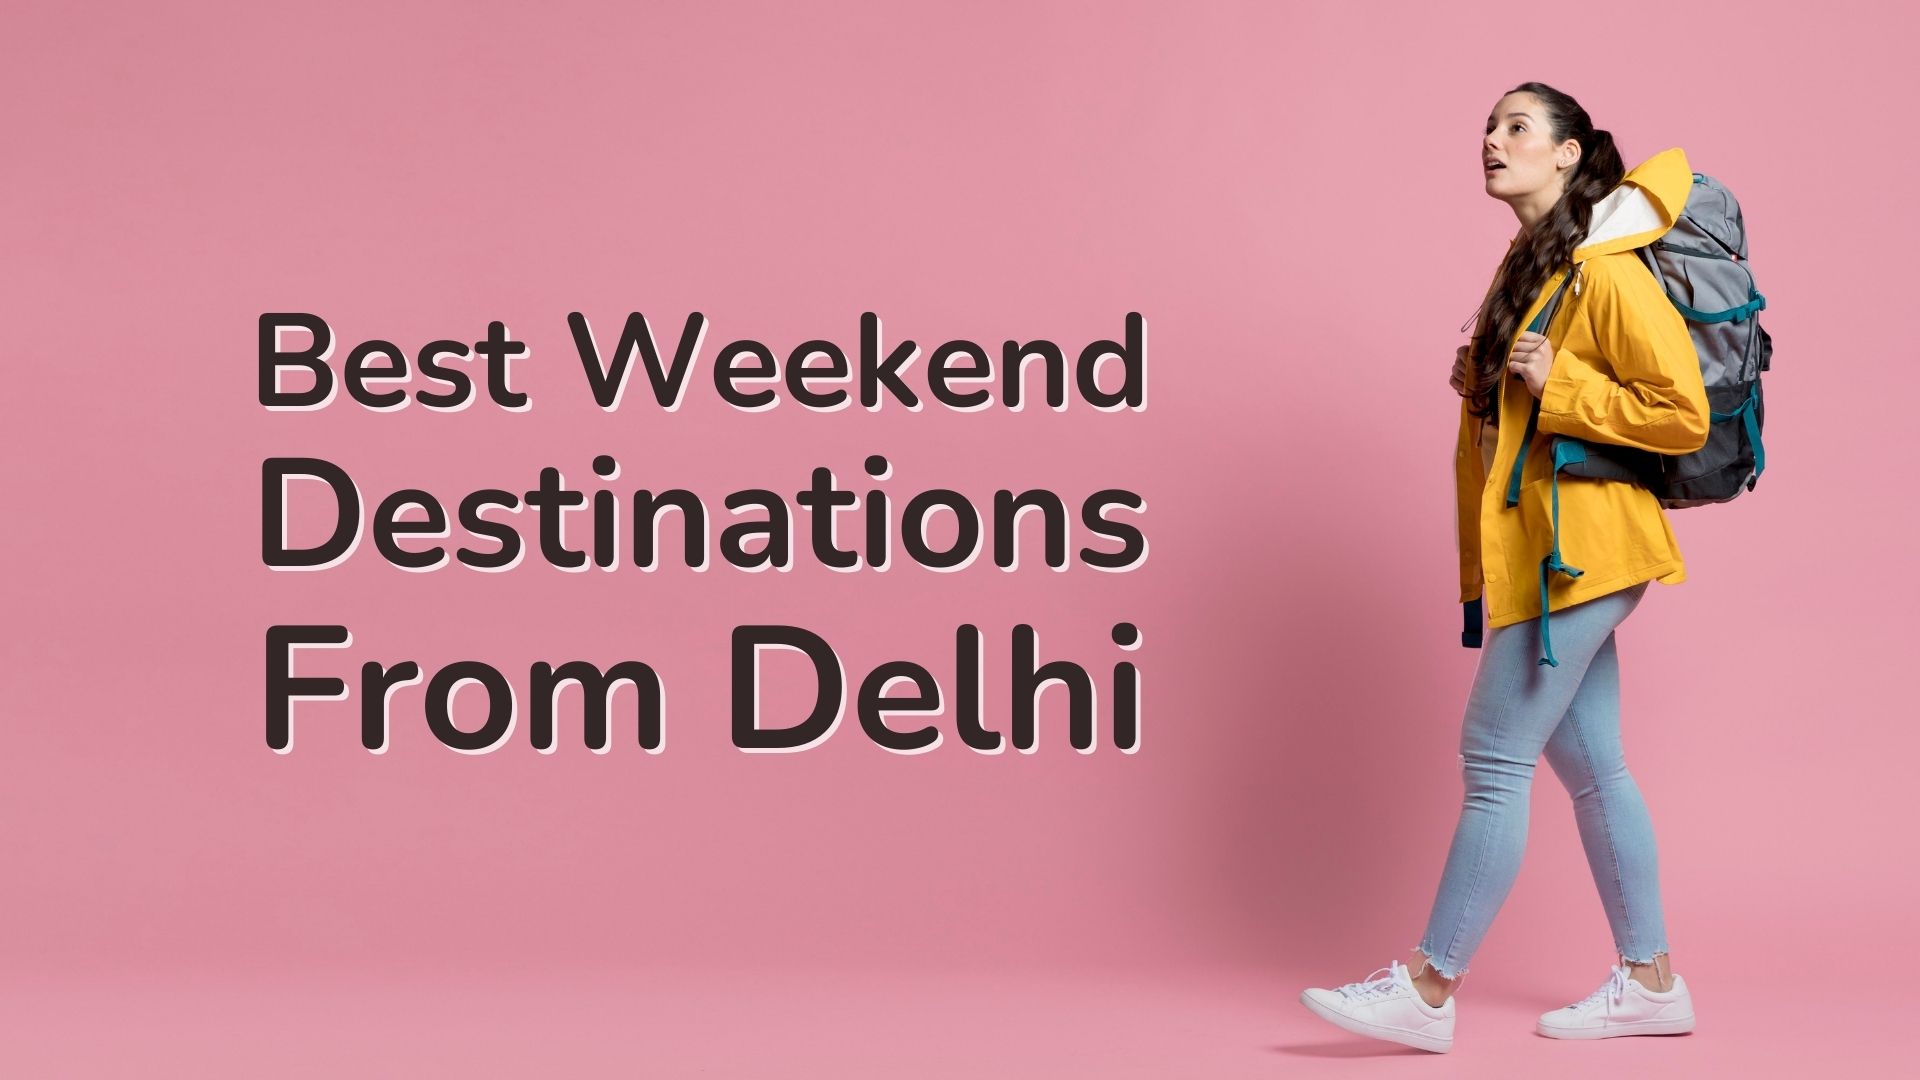 Destination from Delhi for weekends